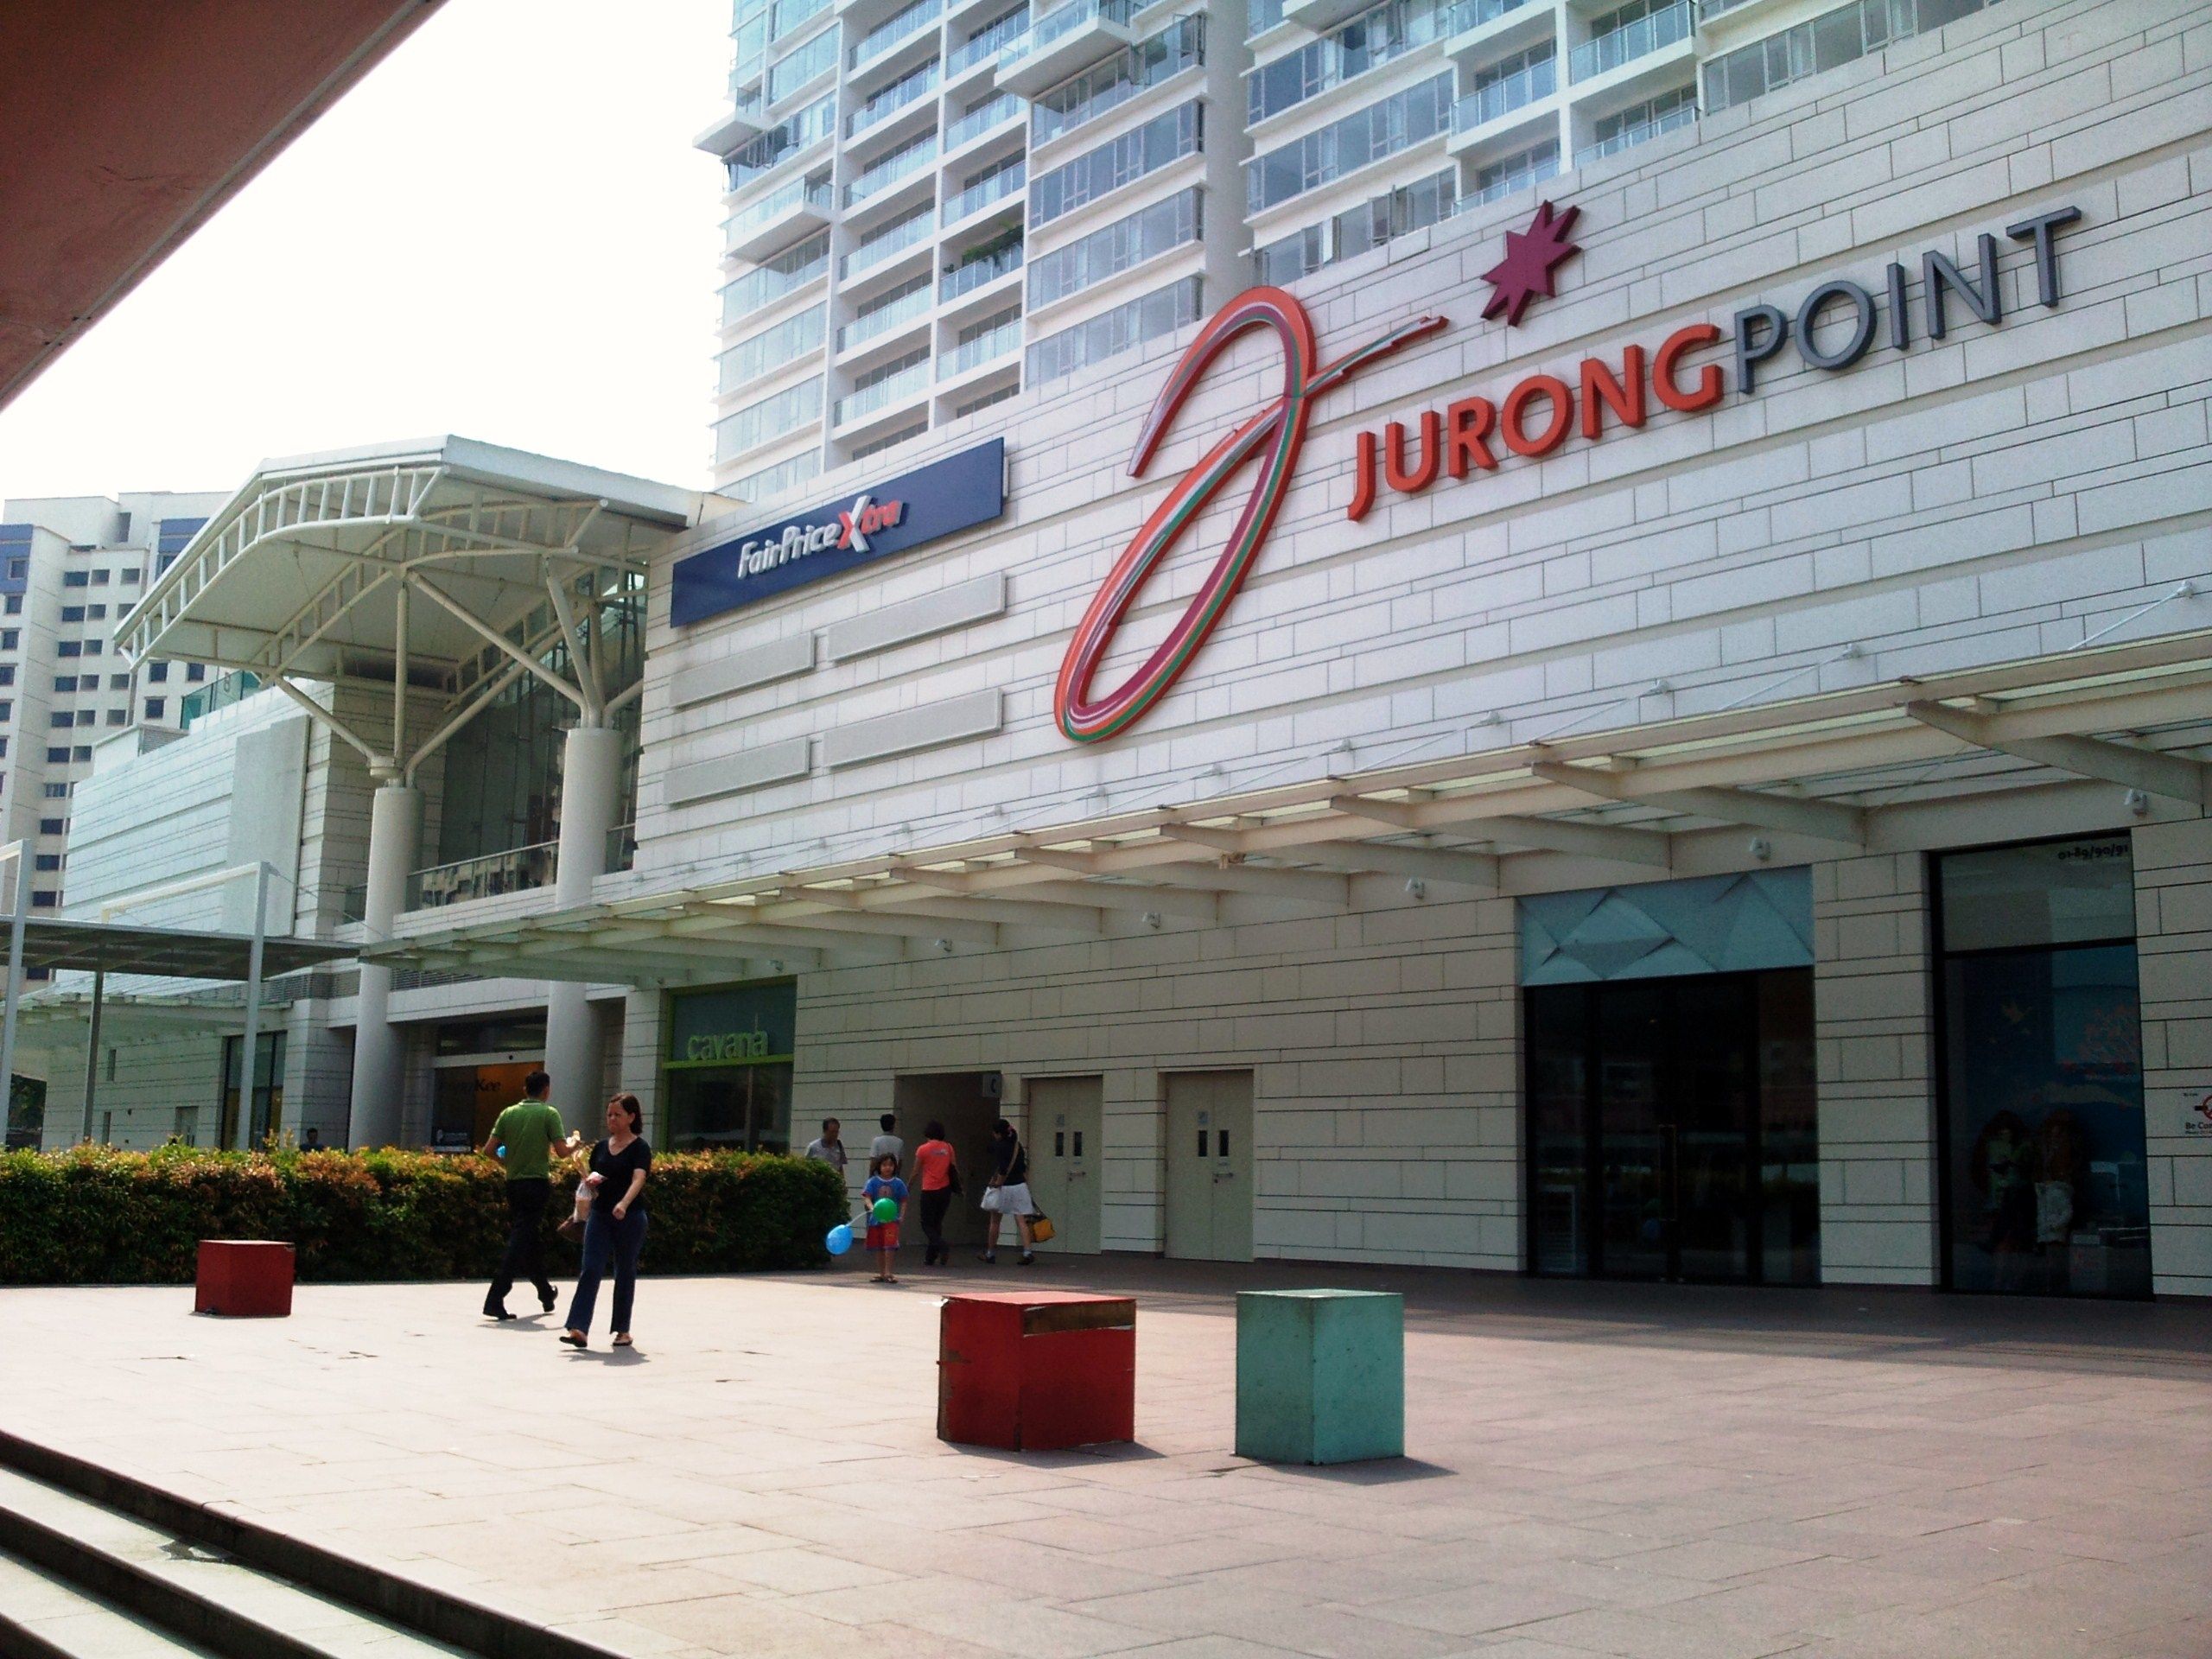 The entrance to the Jurong Point shopping centre in Singapore. Photo: Wikipedia